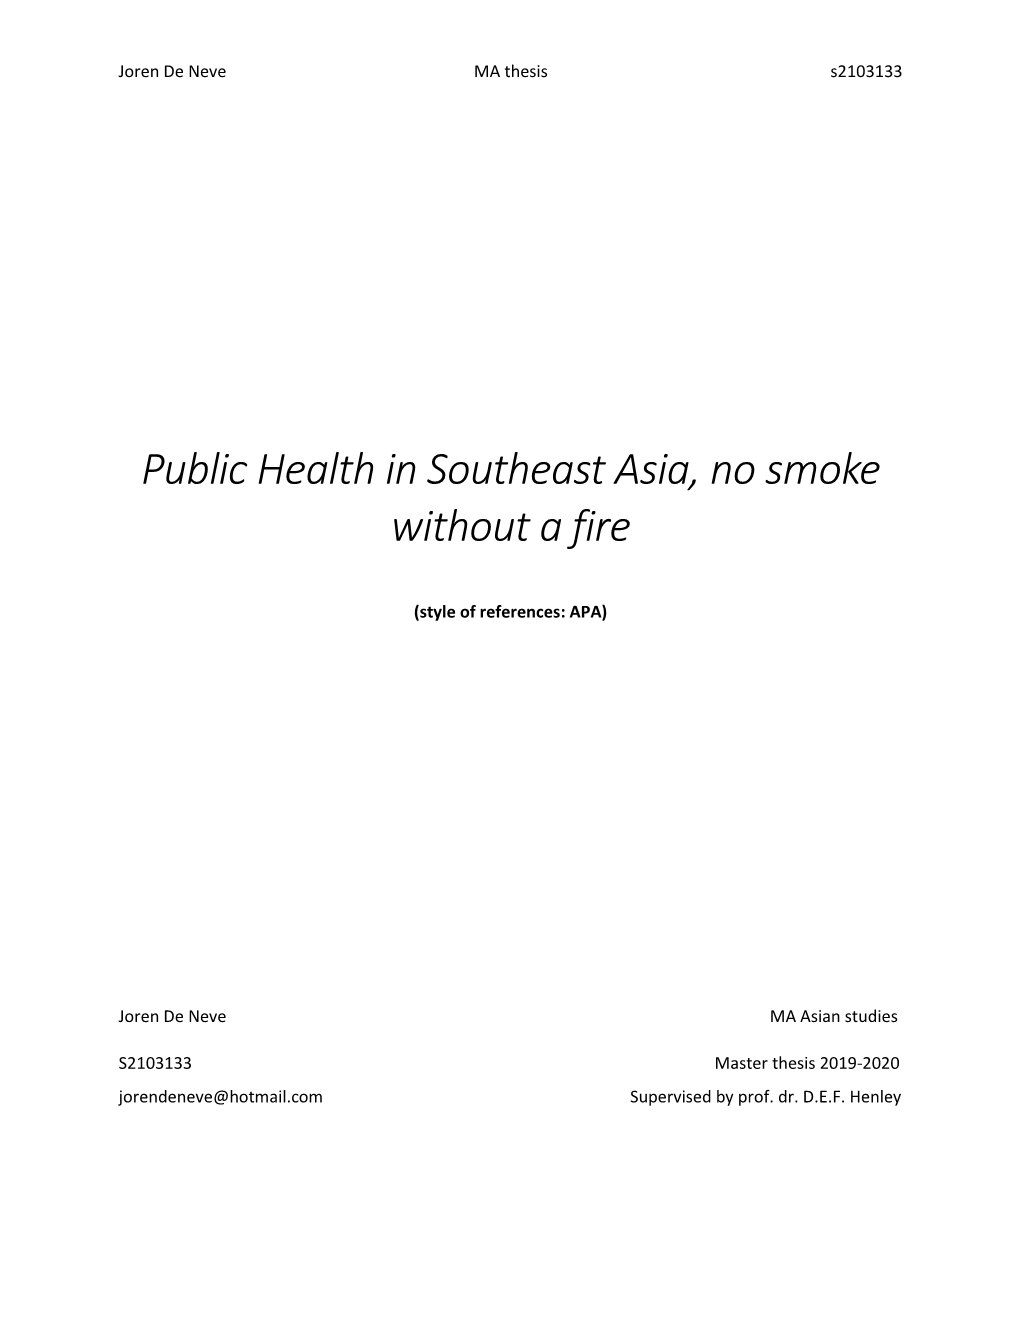 Public Health in Southeast Asia, No Smoke Without a Fire